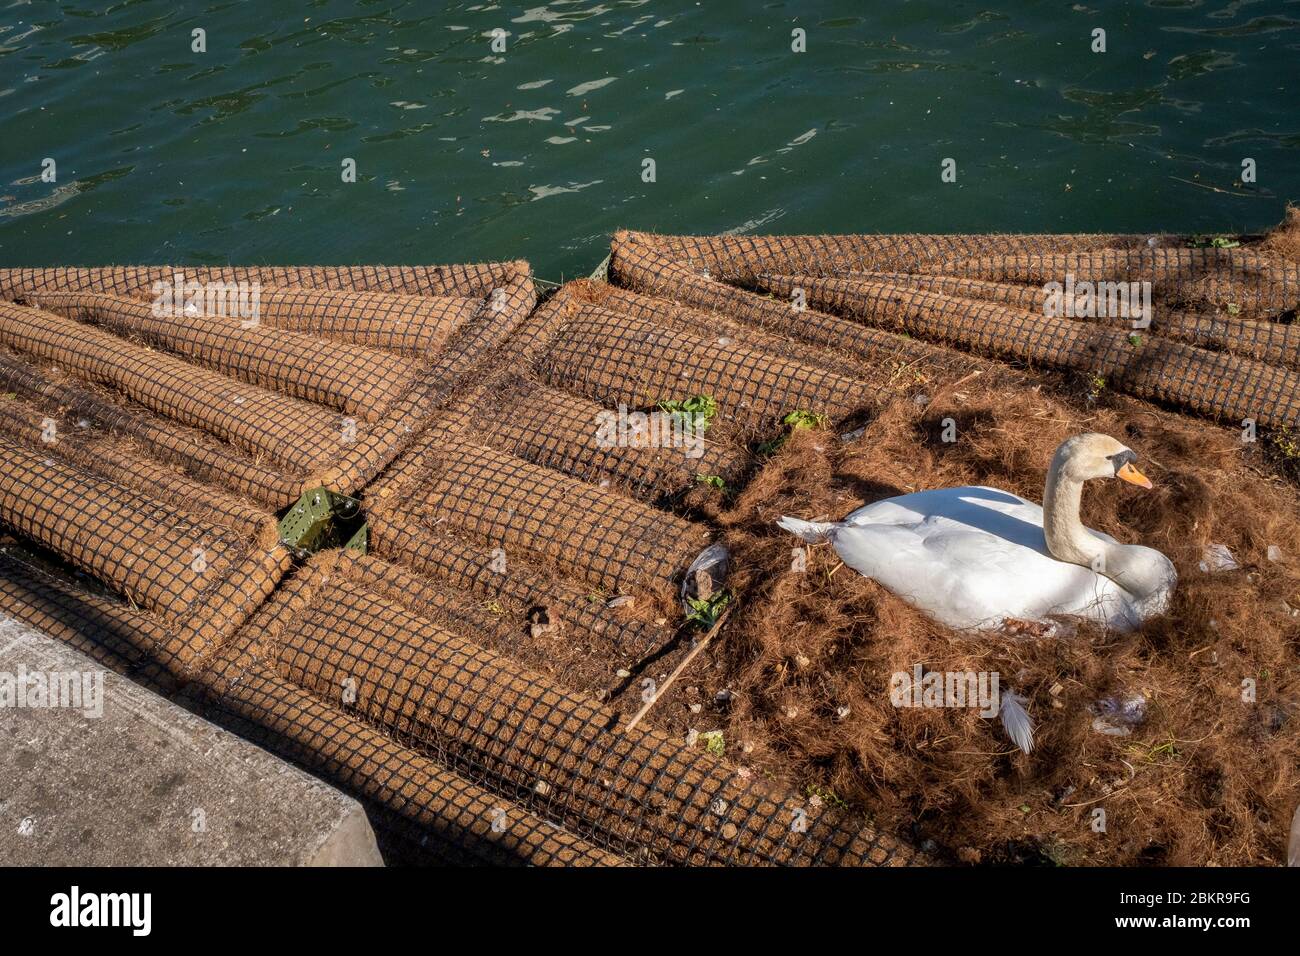 France, Paris, COVID-19 (or Coronavirus) lockdown, swan nesting on the banks of the Ourcq canal Stock Photo